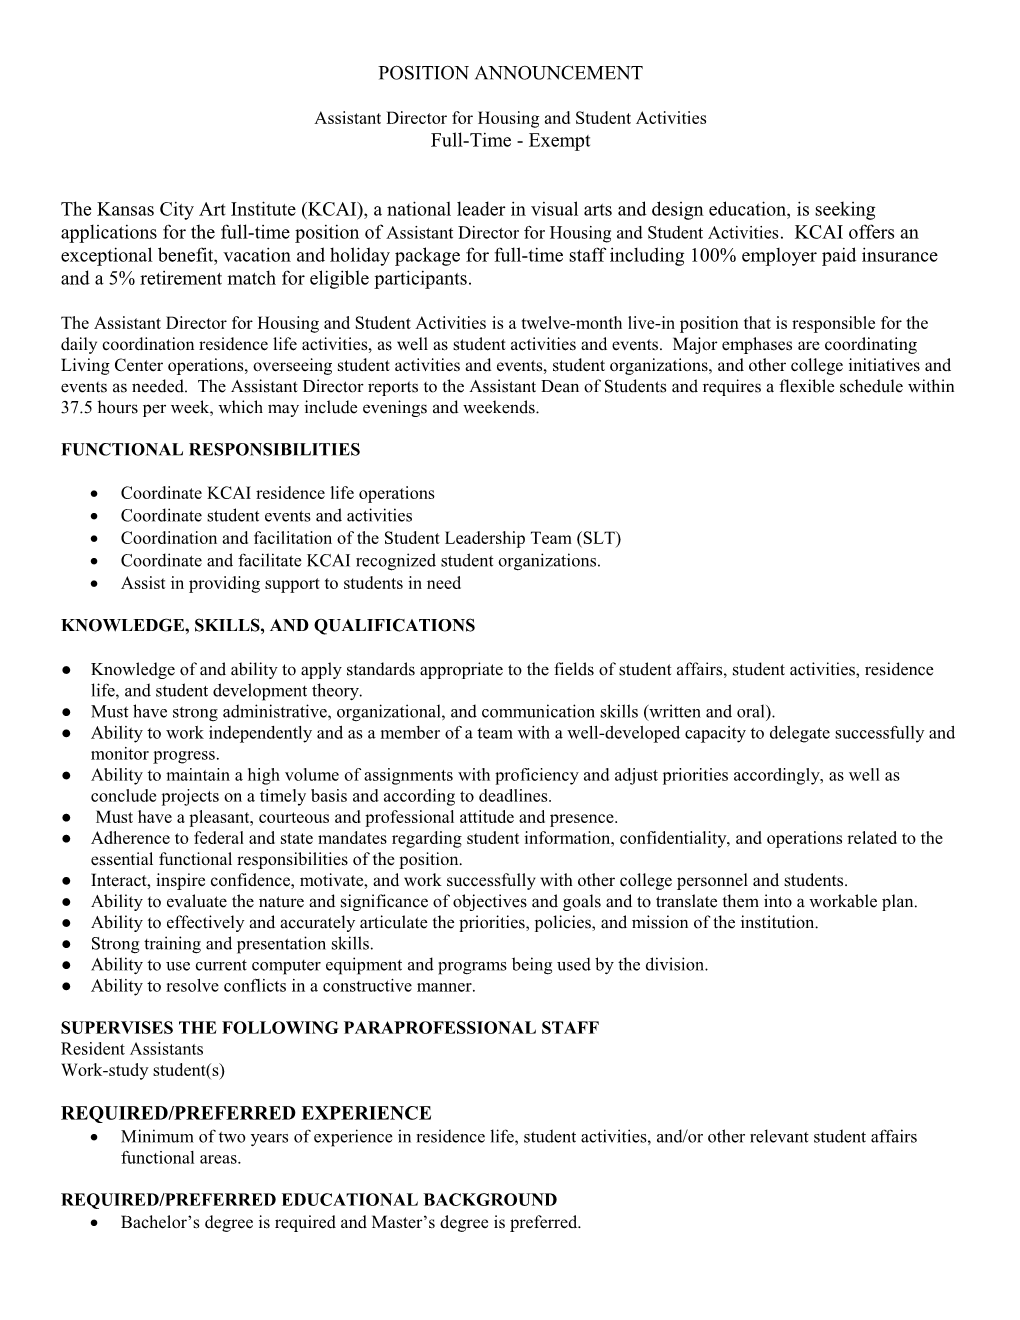 Assistant Director for Housing and Student Activities